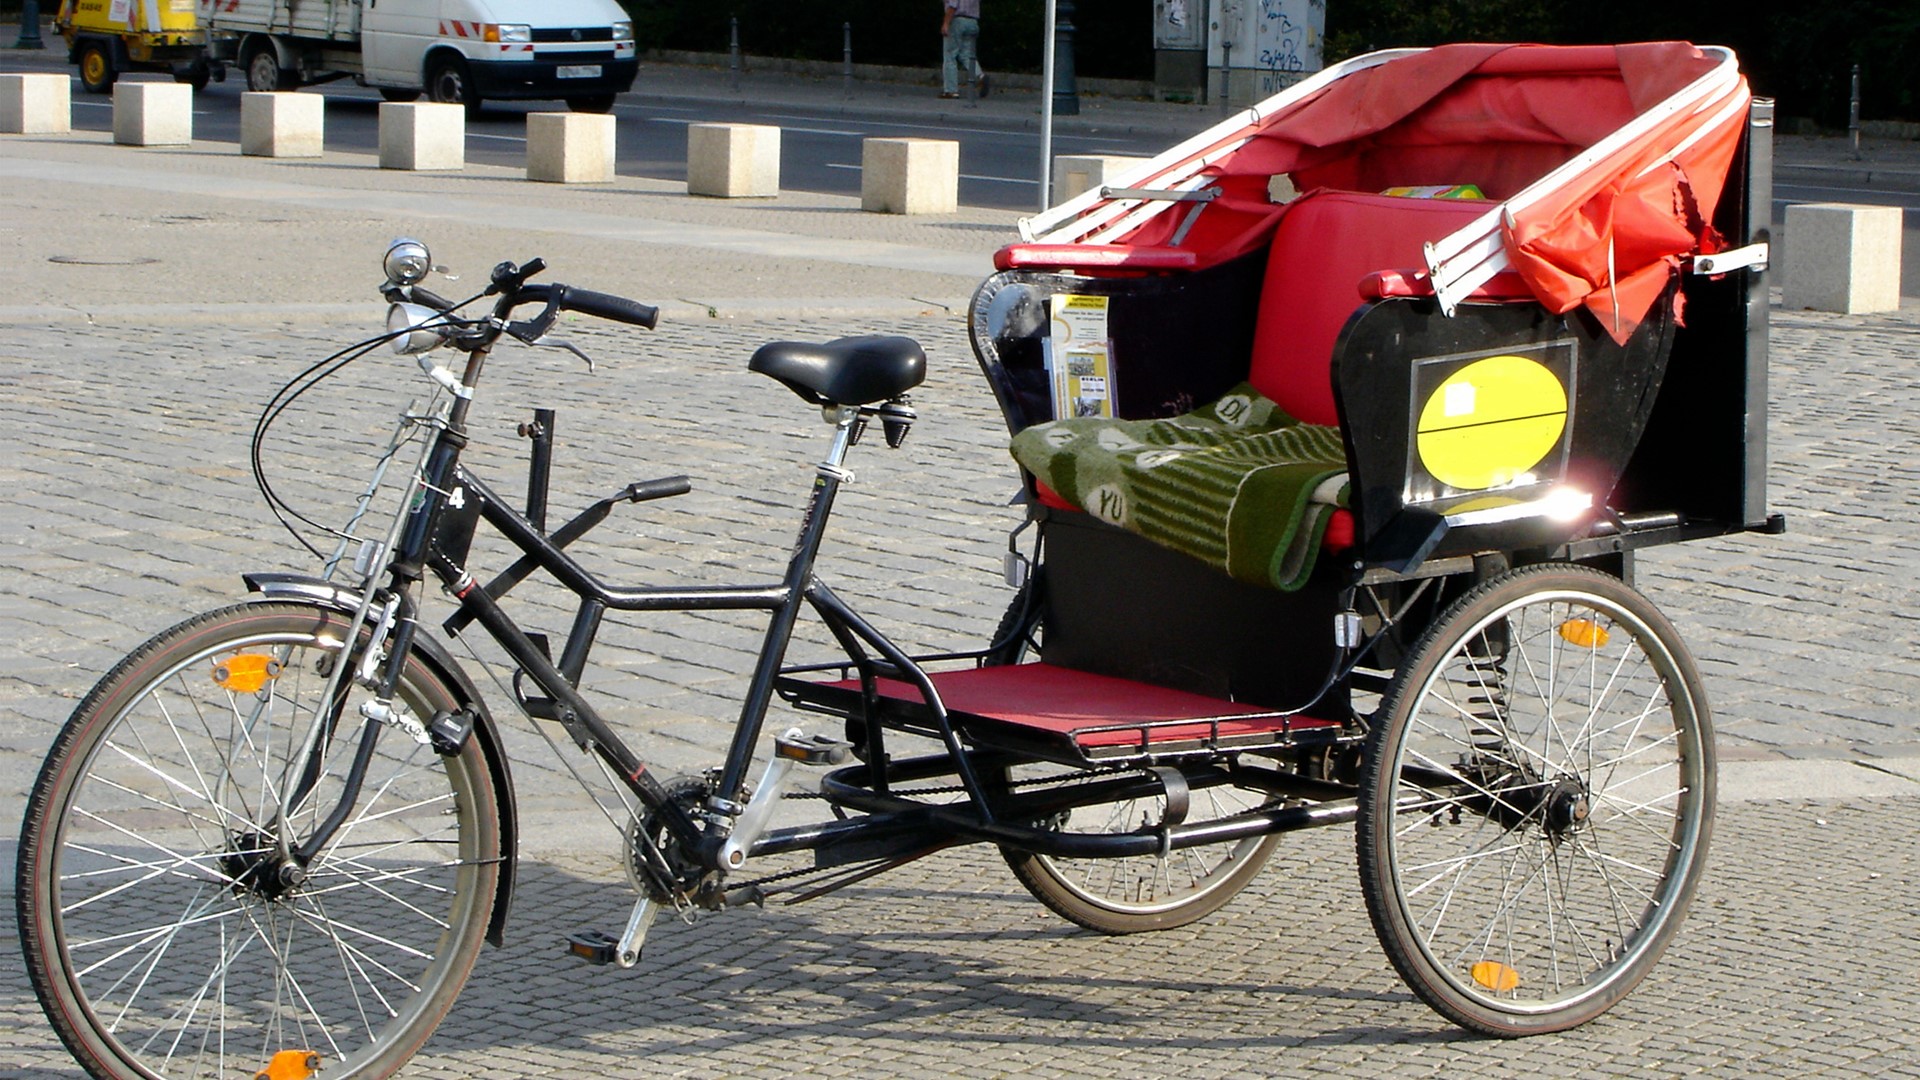 The City of Houston said it requires all pedicabs to be permitted and carry insurance for its passengers, but some pedicab drivers operate illegally.